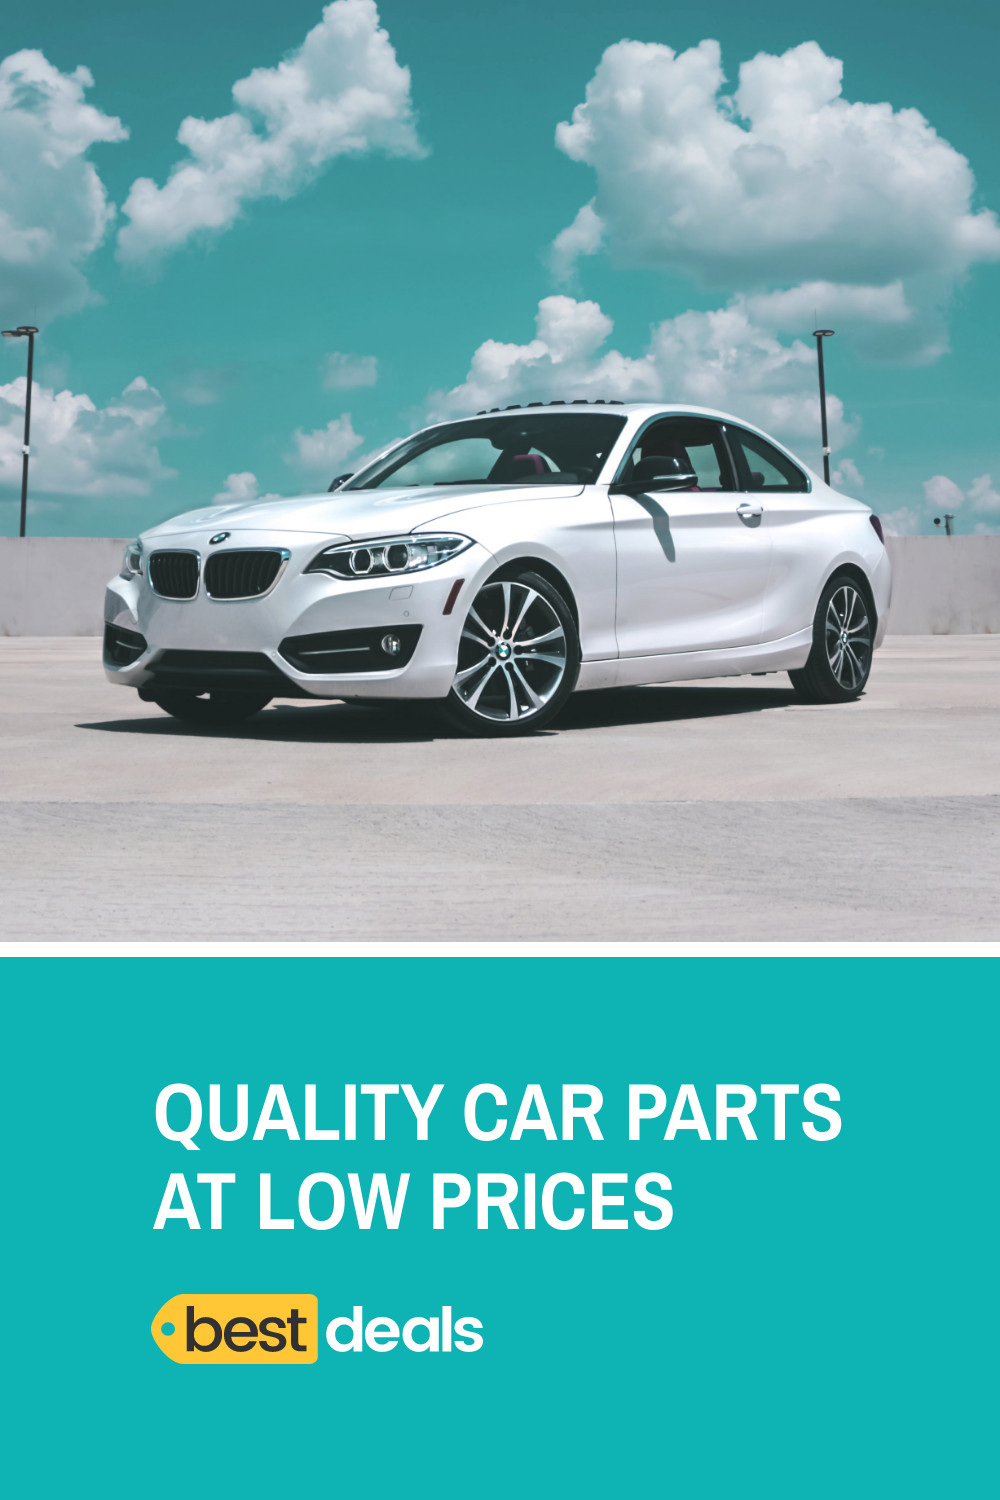 Quality Car Parts at Low Prices